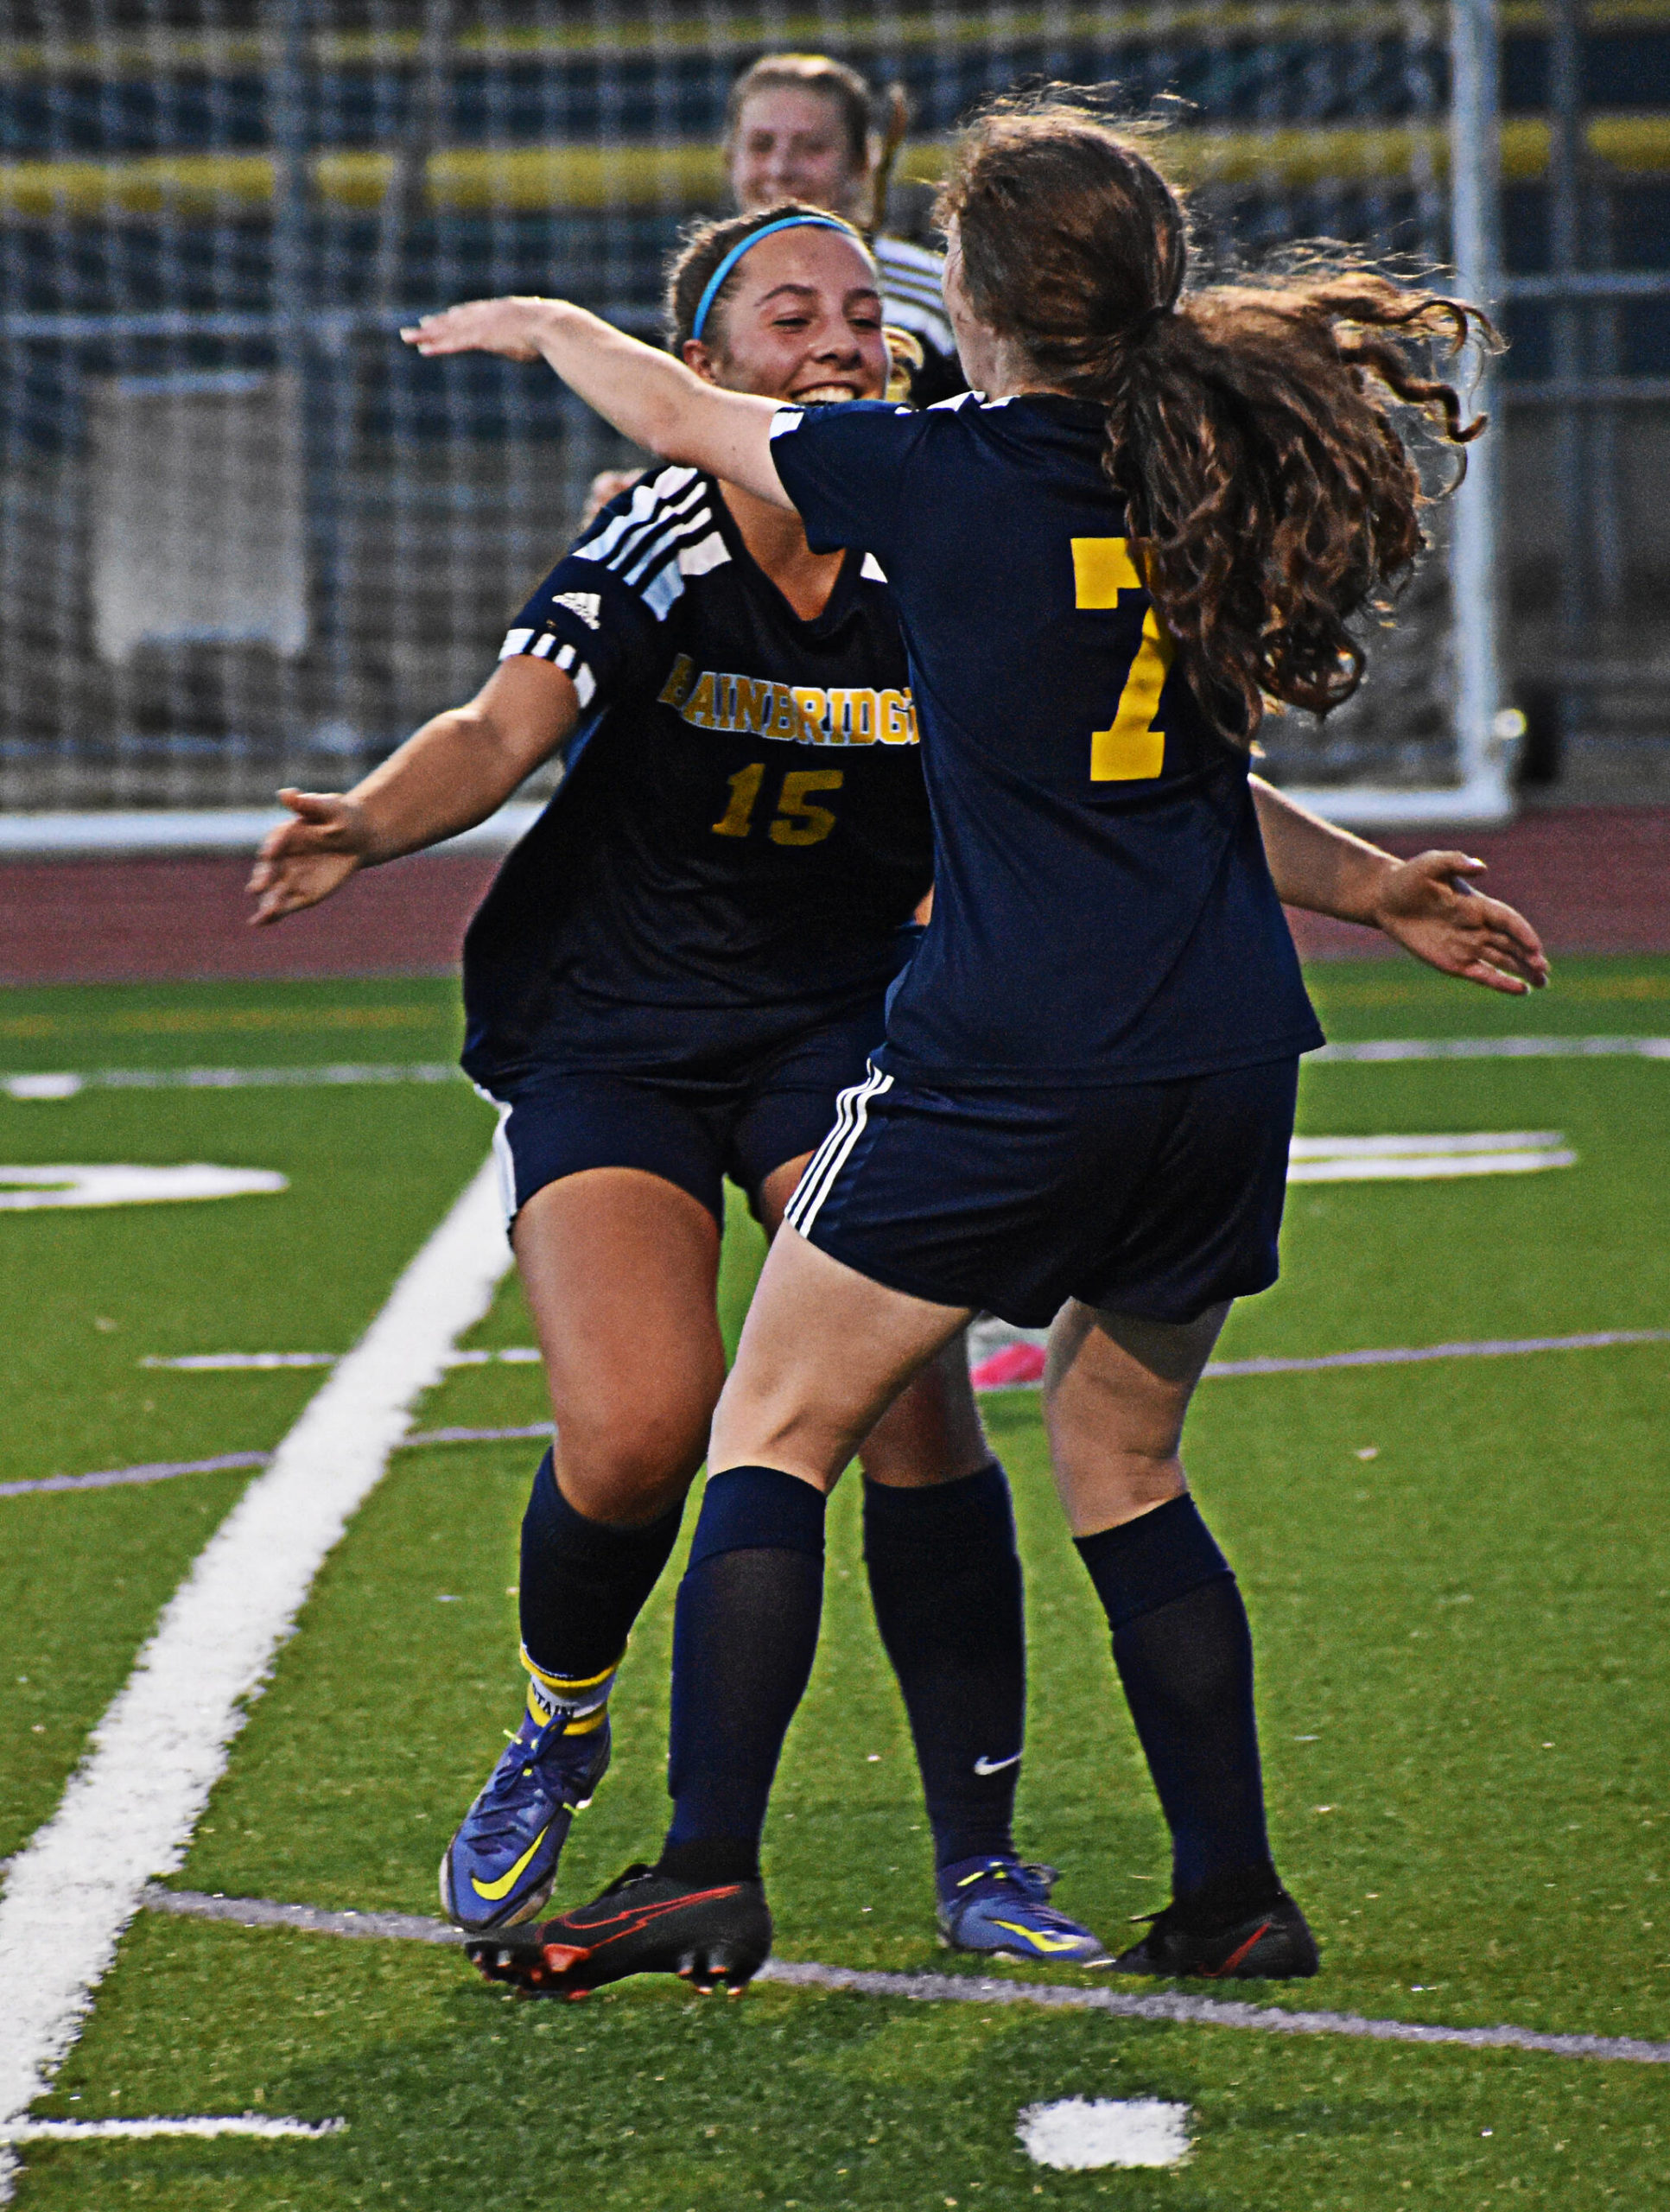 Gabby Weis celebrates with Savannah Mabee after scoring the first of four goals in the game. Nicholas Zeller-Singh/Bainbridge Review Photos